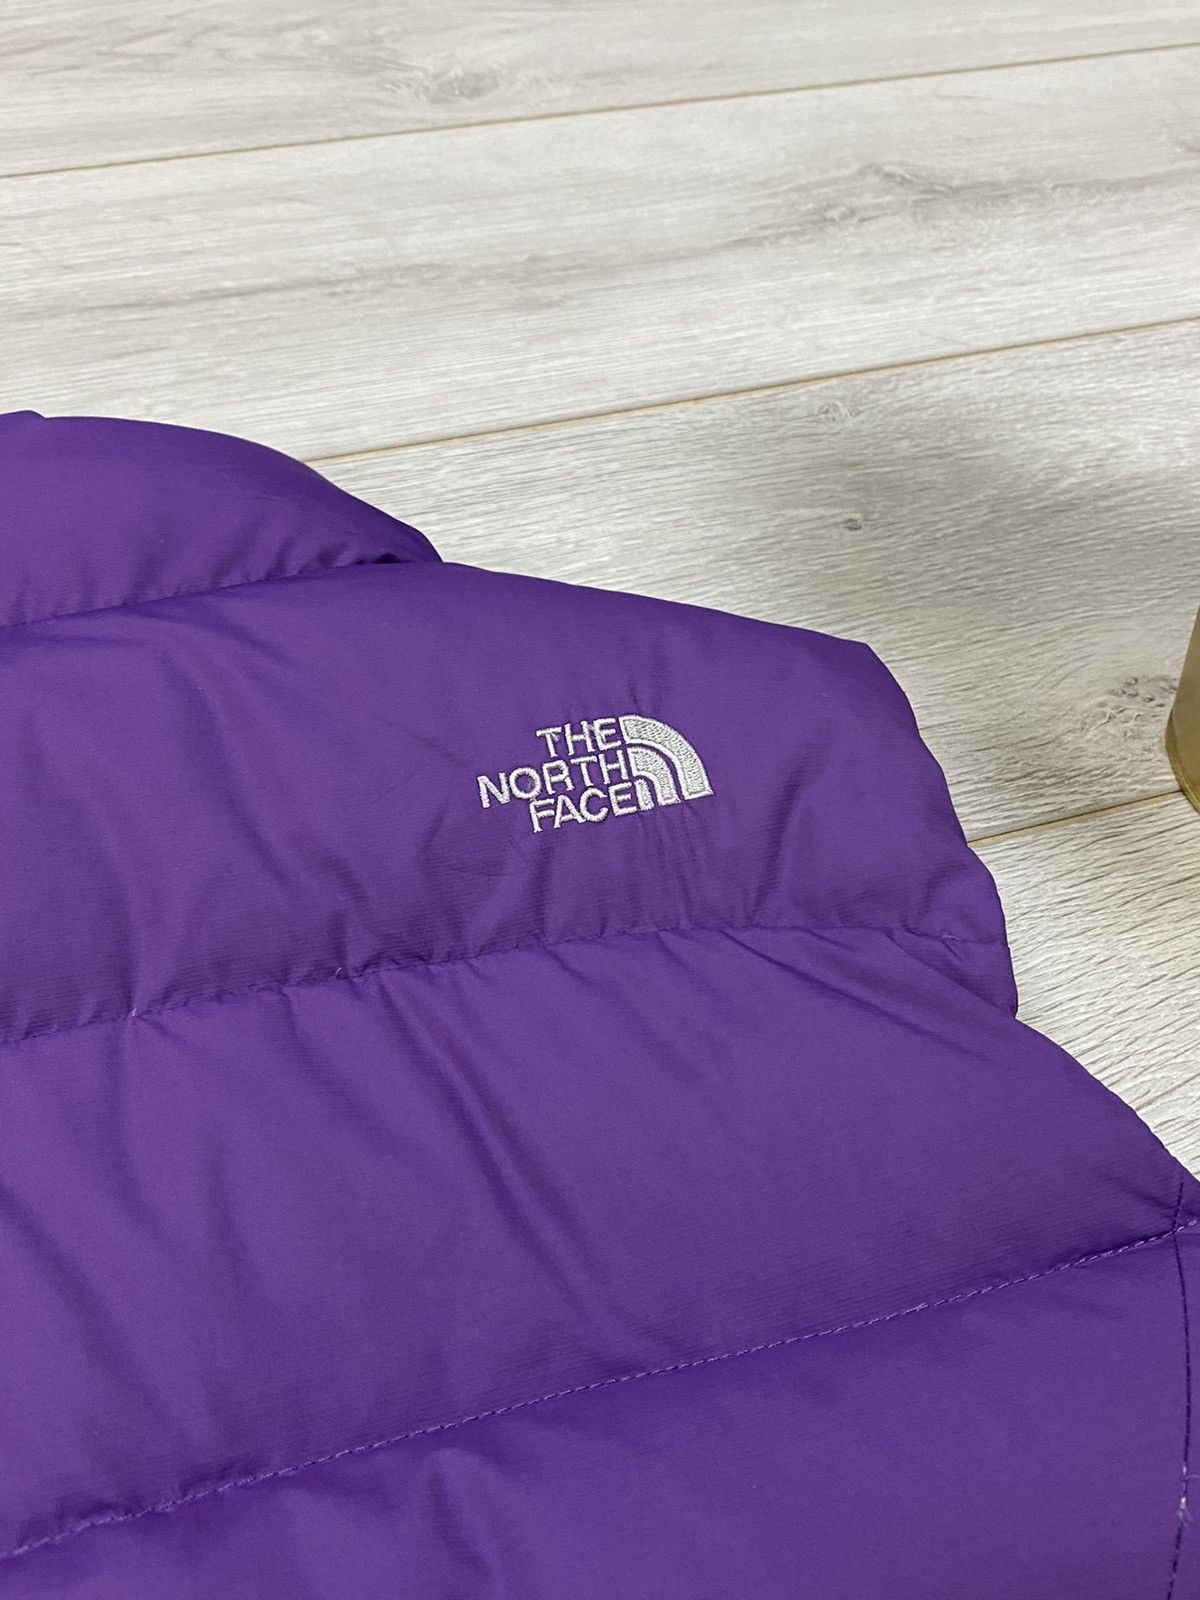 The North Face The North Face 700 purple women down vest Size XS / US 0-2 / IT 36-38 - 6 Thumbnail